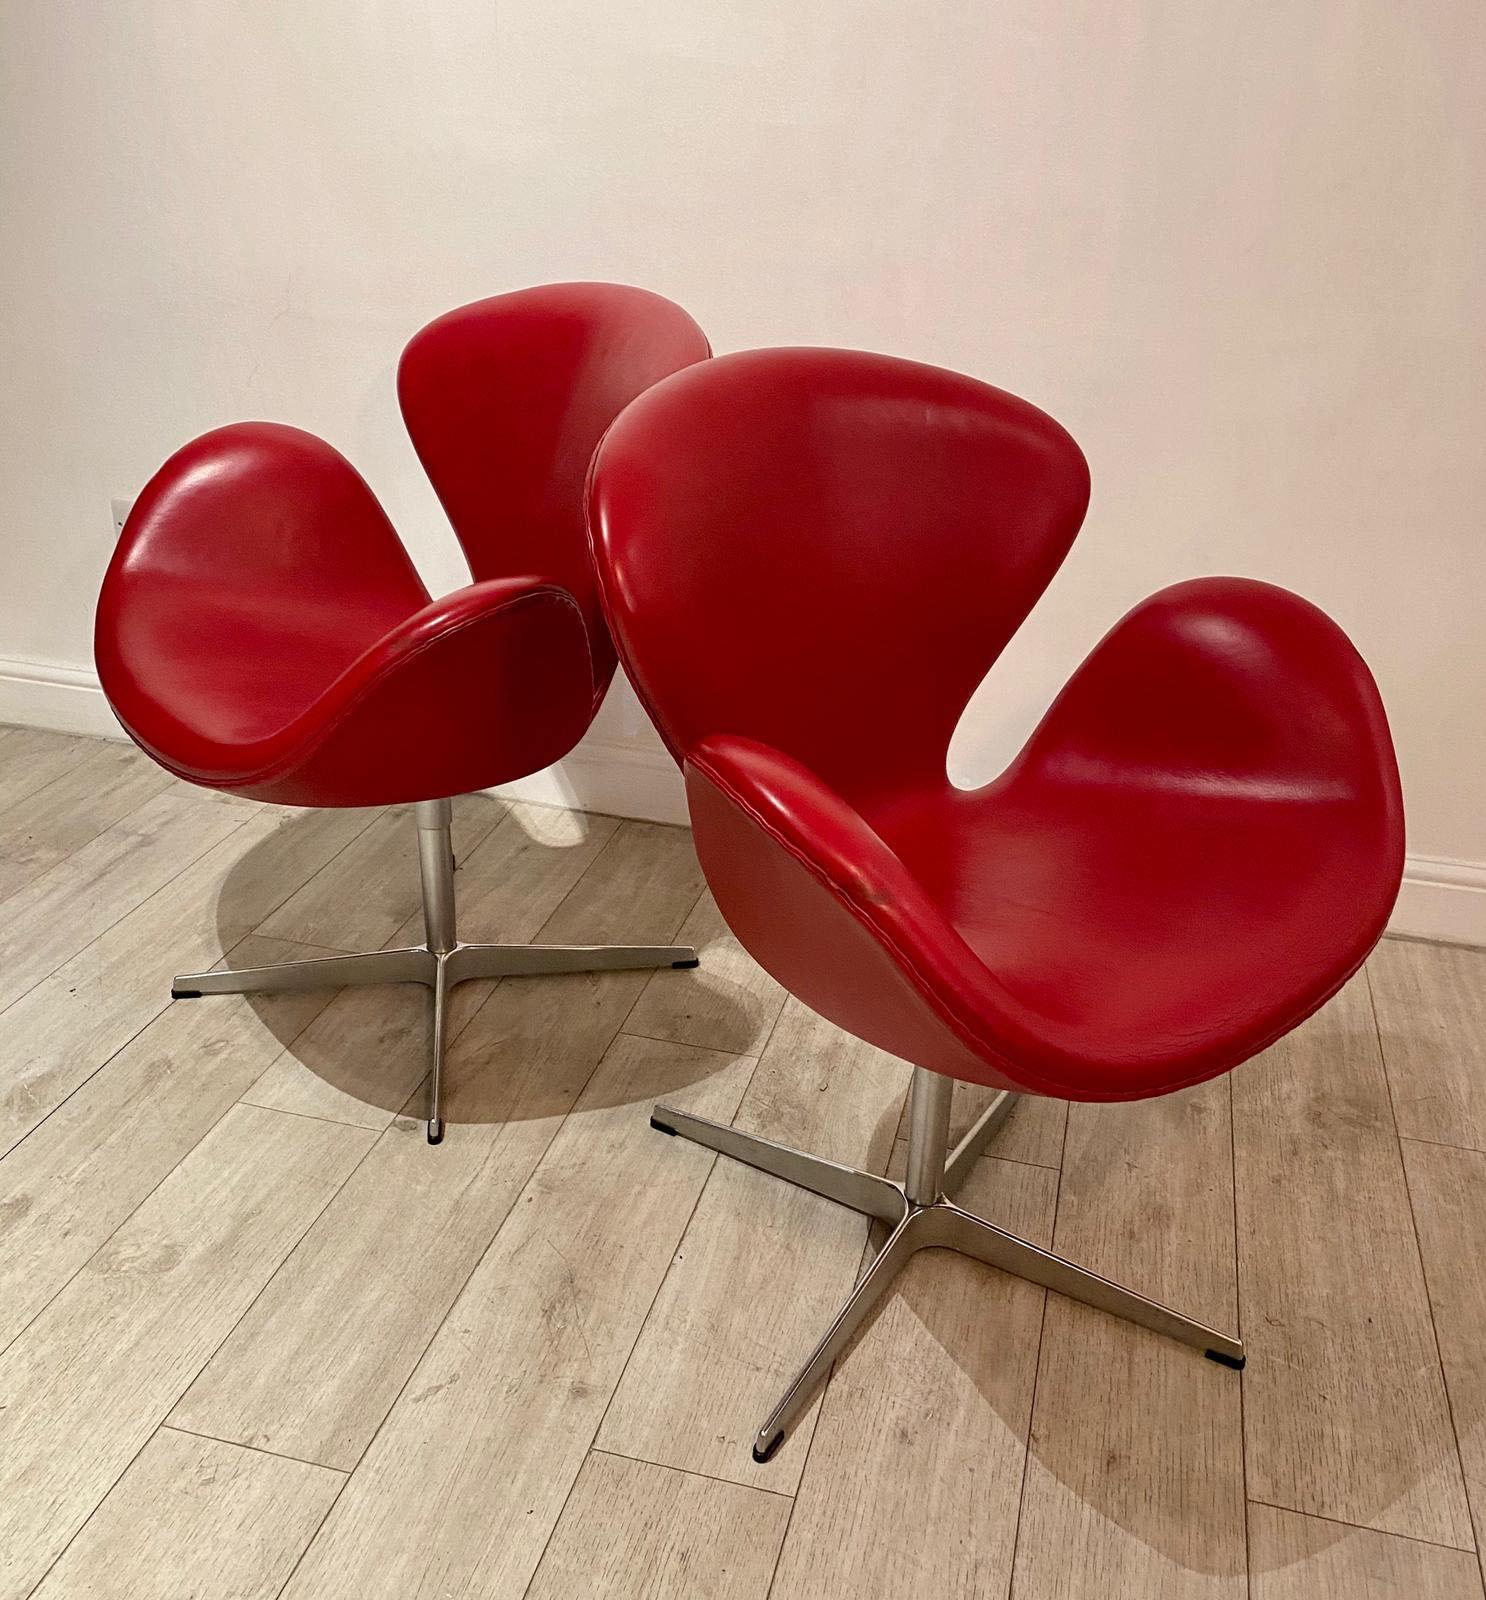 Arne Jacobsen designed the Swan chair for the lobby of the SAS Hotel in Copenhagen and has become an icon of Mid-Century Modern design. 

This lovely pair of swan chairs by Fritz Hansen have aluminum bases which smoothly swivel and in their